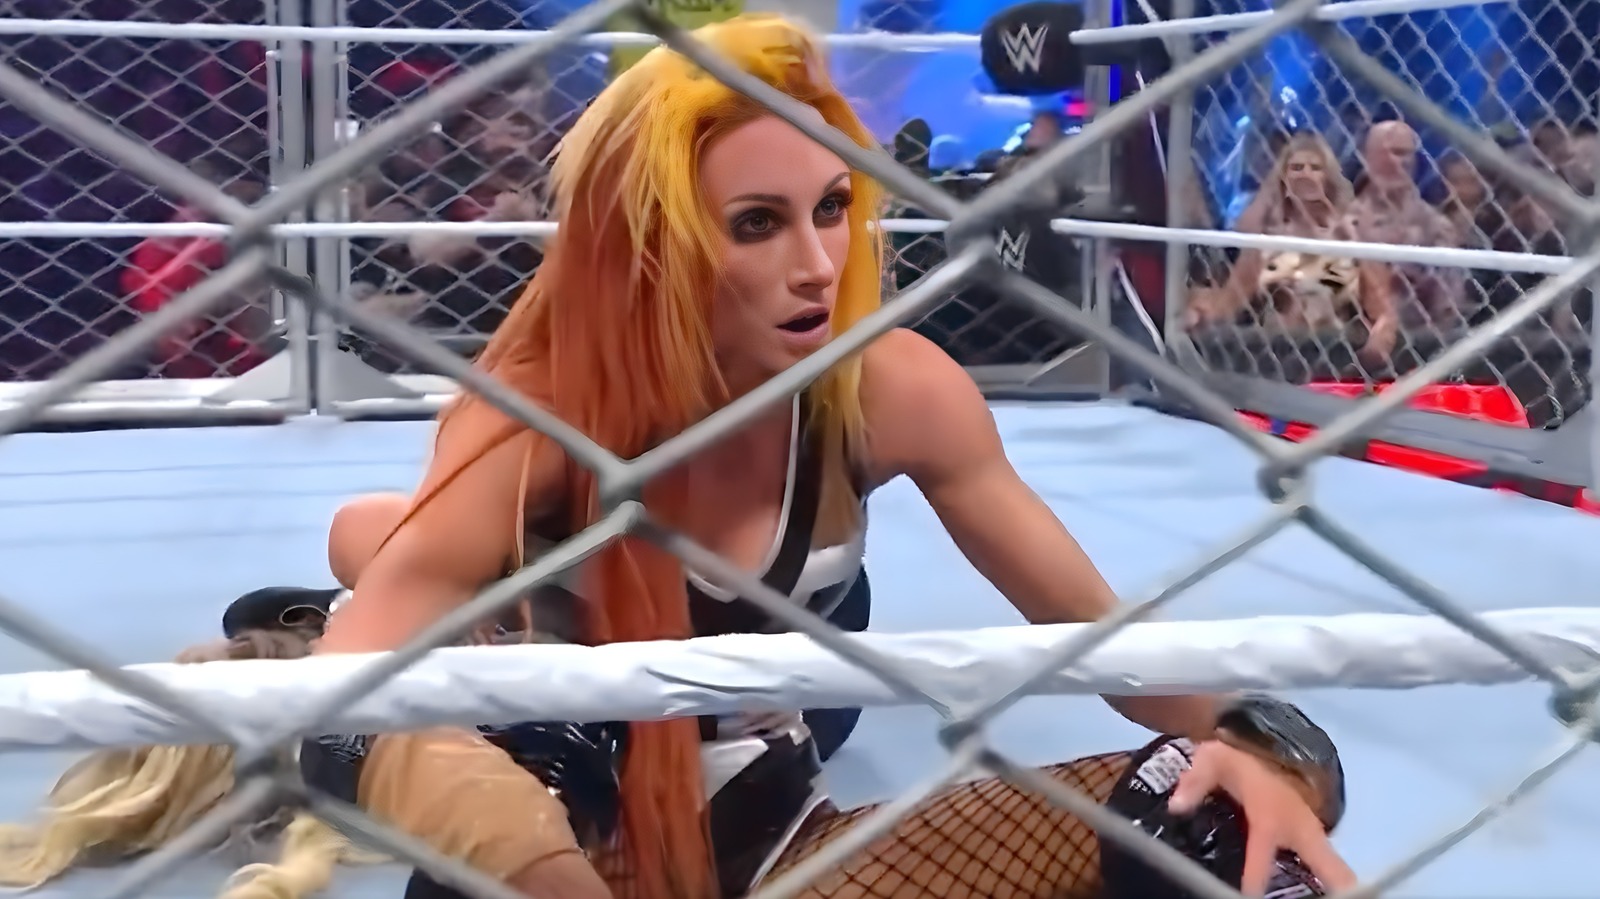 Becky Lynch vs. Trish Stratus cage match advertised for WWE Payback -  WON/F4W - WWE news, Pro Wrestling News, WWE Results, AEW News, AEW results